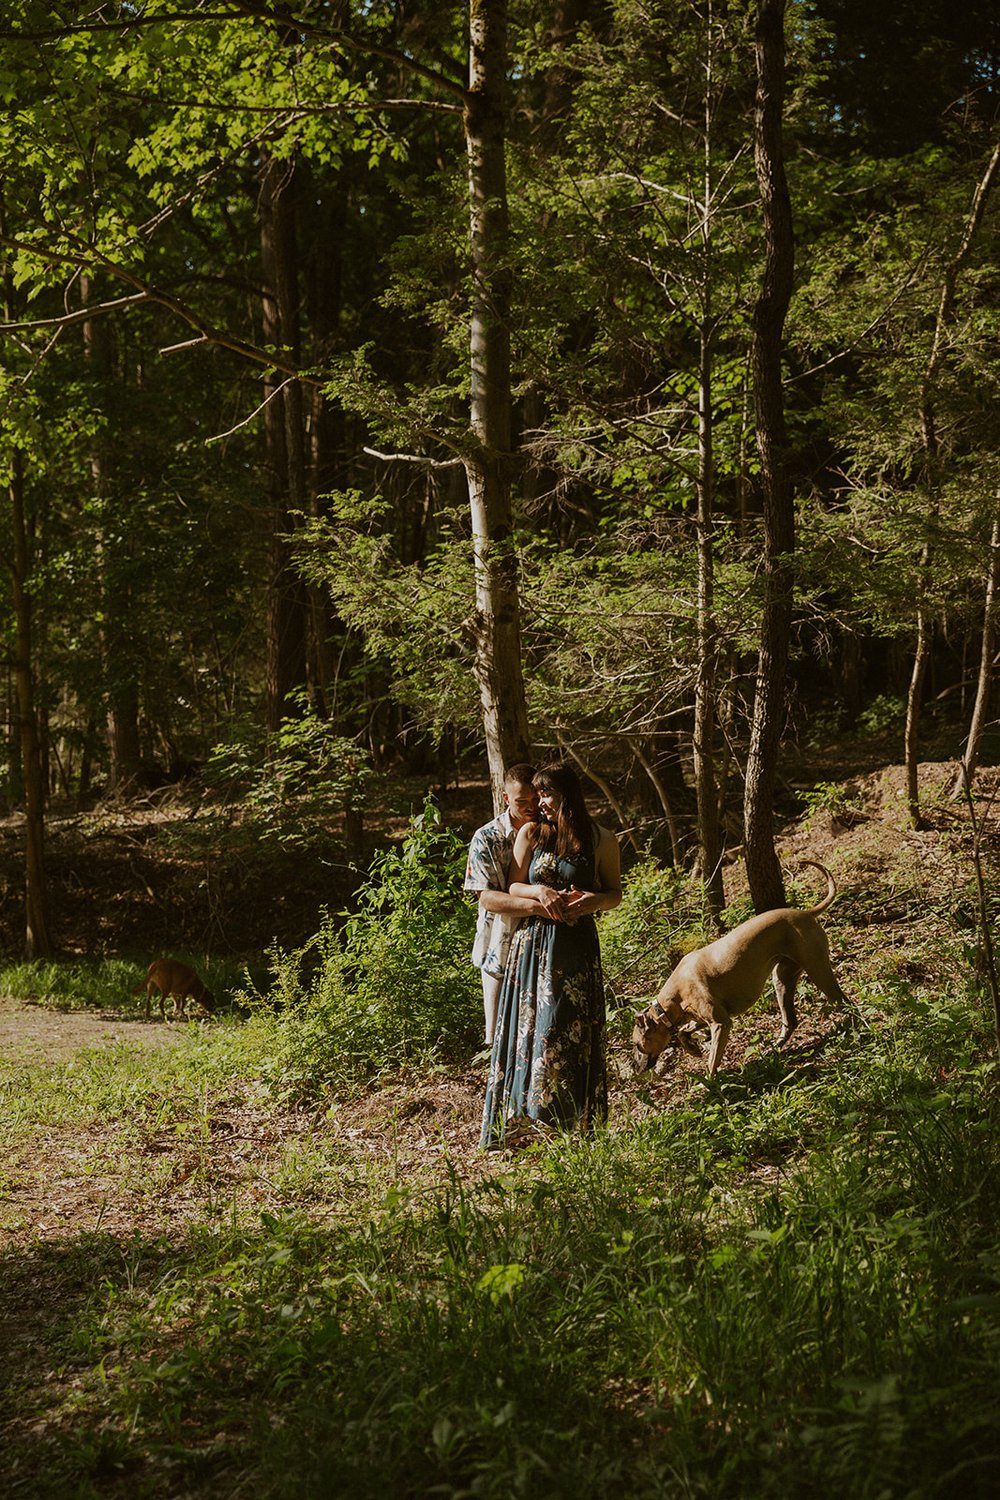 Hade holds maggie while standing in the lush greenery of the falls while their dogs wander. 